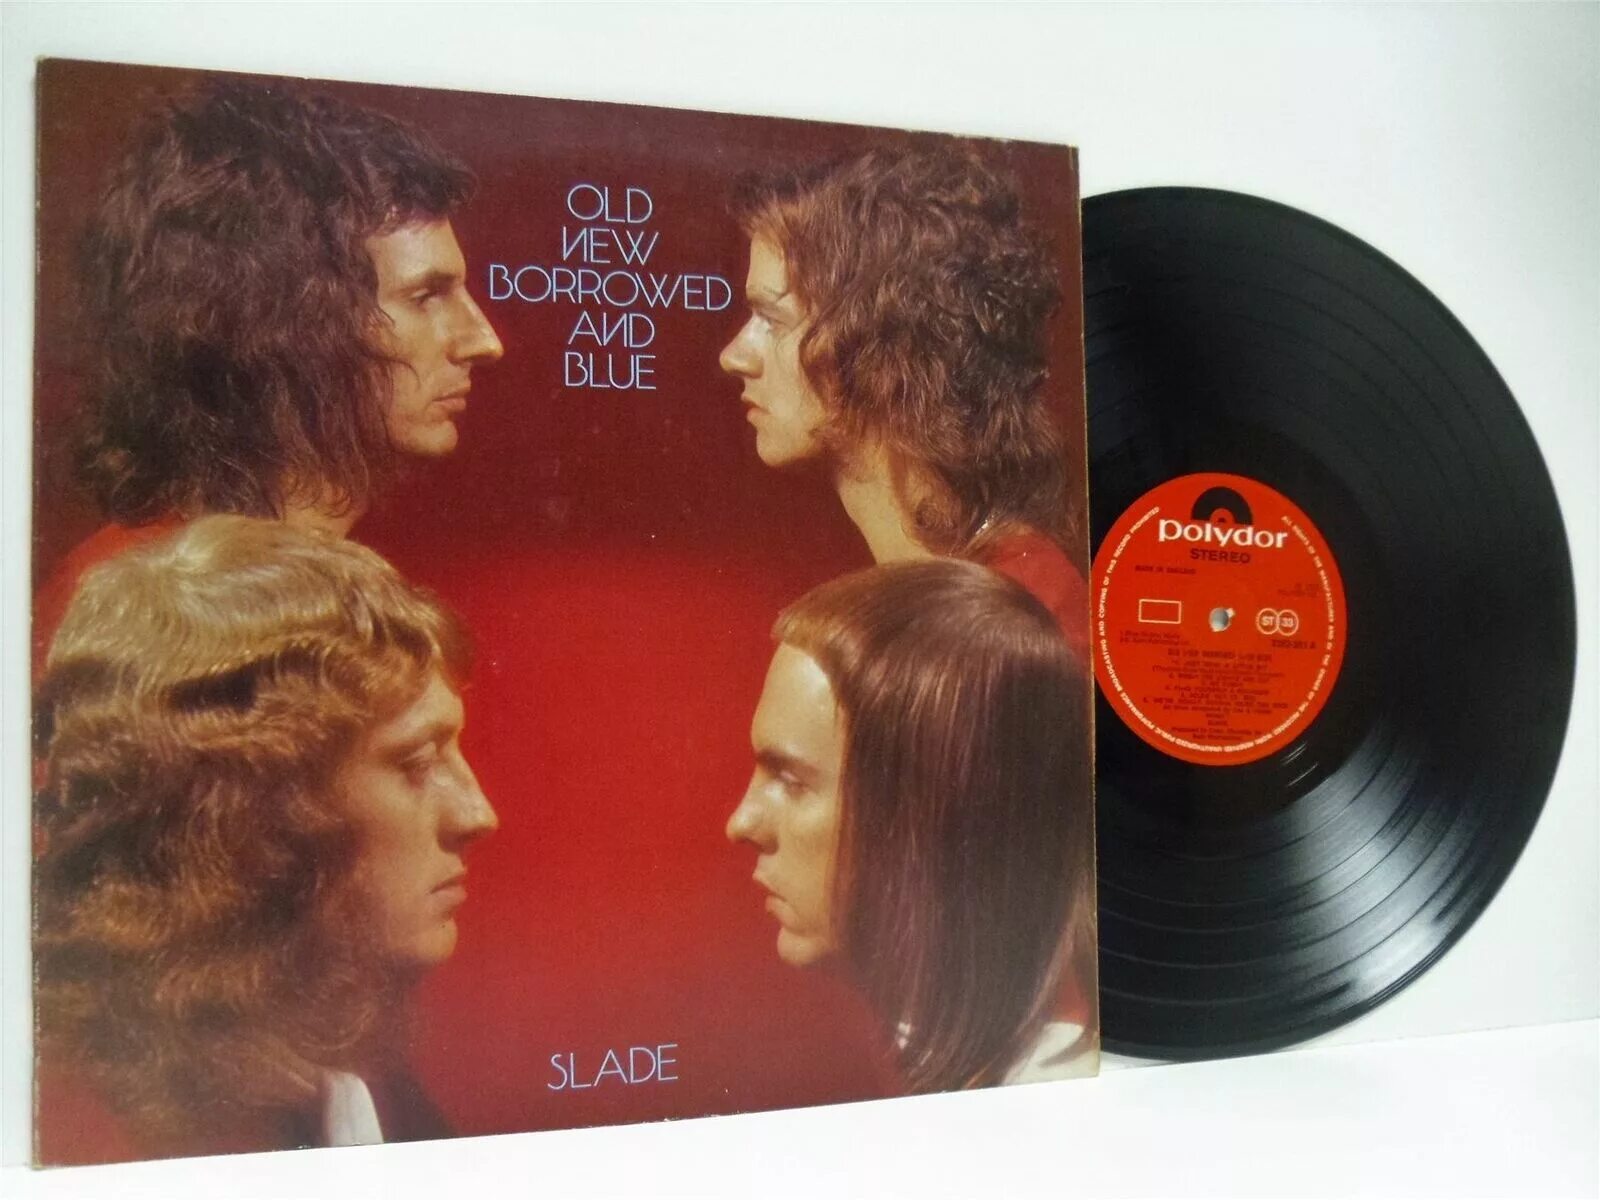 Old new day. Slade 1974. Slade old New Borrowed and Blue 1974. Slade old New Borrowed and Blue 1974 обложка. Slade 1974 Sladest LP.